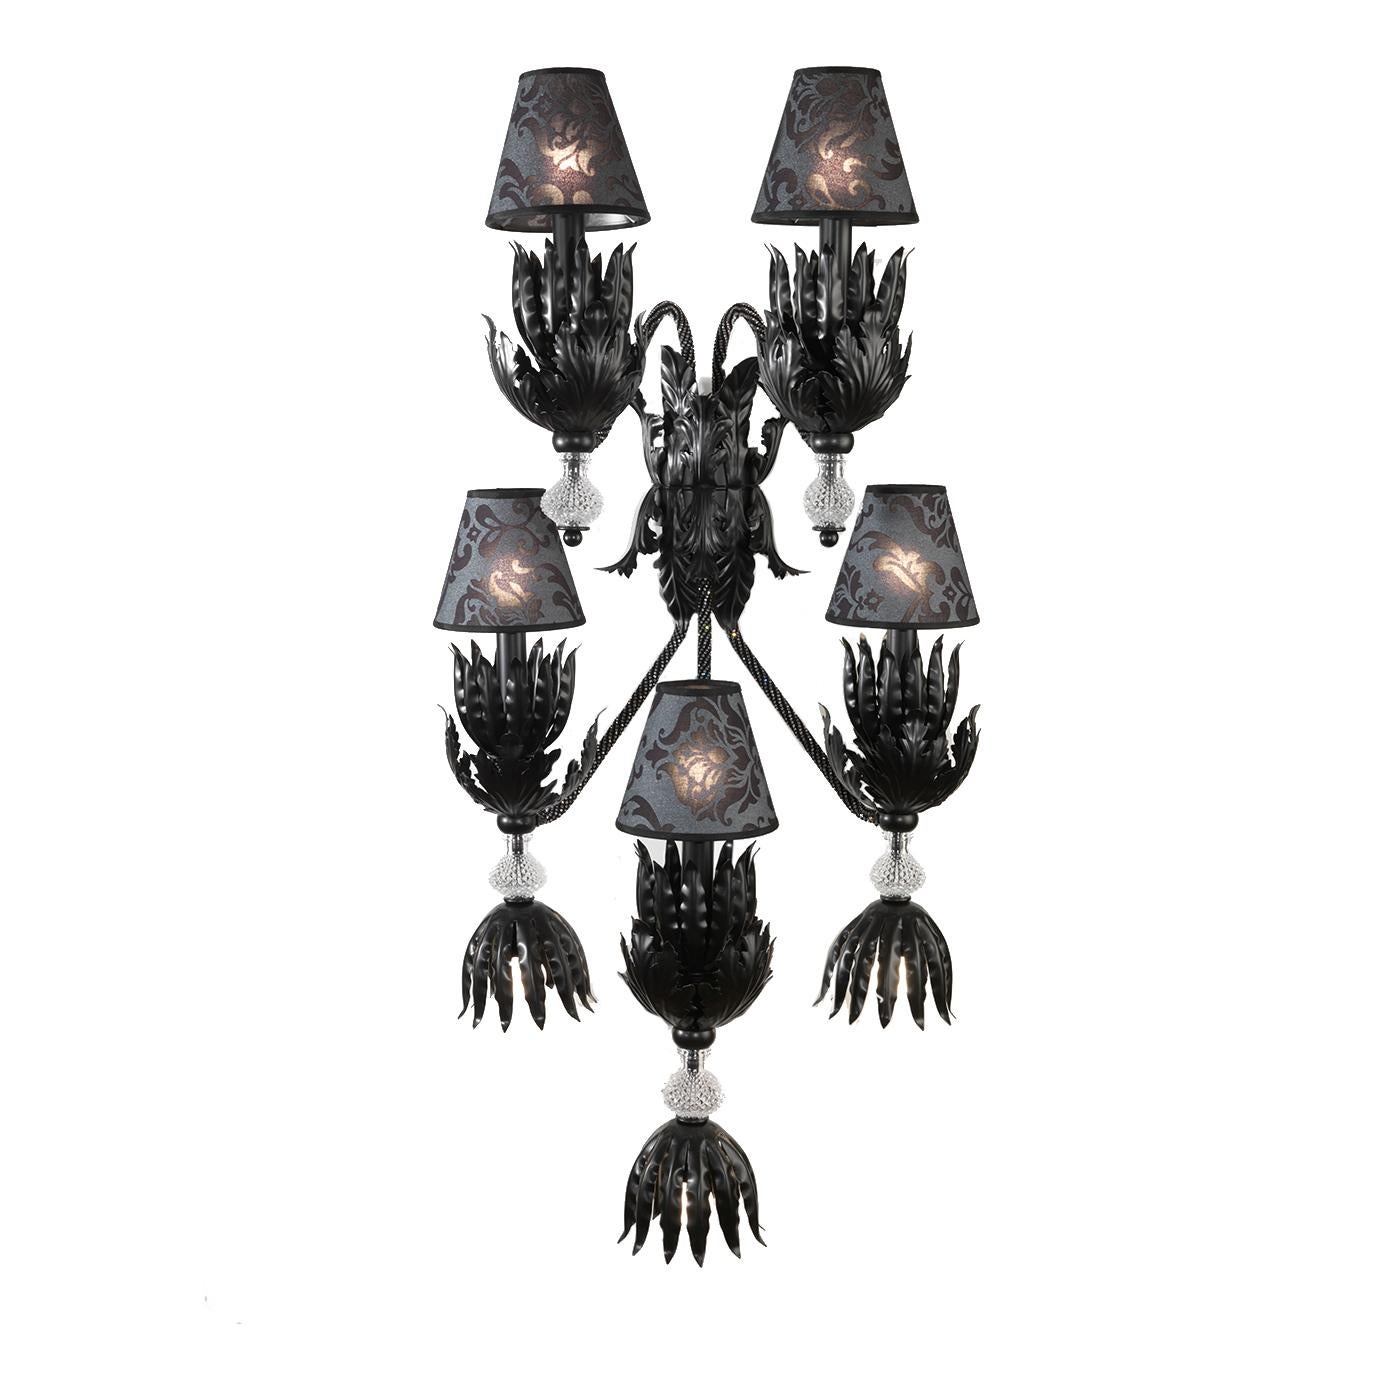 Part of the Enchanté collection, this sconce was designed by Leonardo de Carlo and will add drama and elegance to a monochromatic entryway, powder room, or living room. Its structure in hand forged iron with a black finish comprises a base